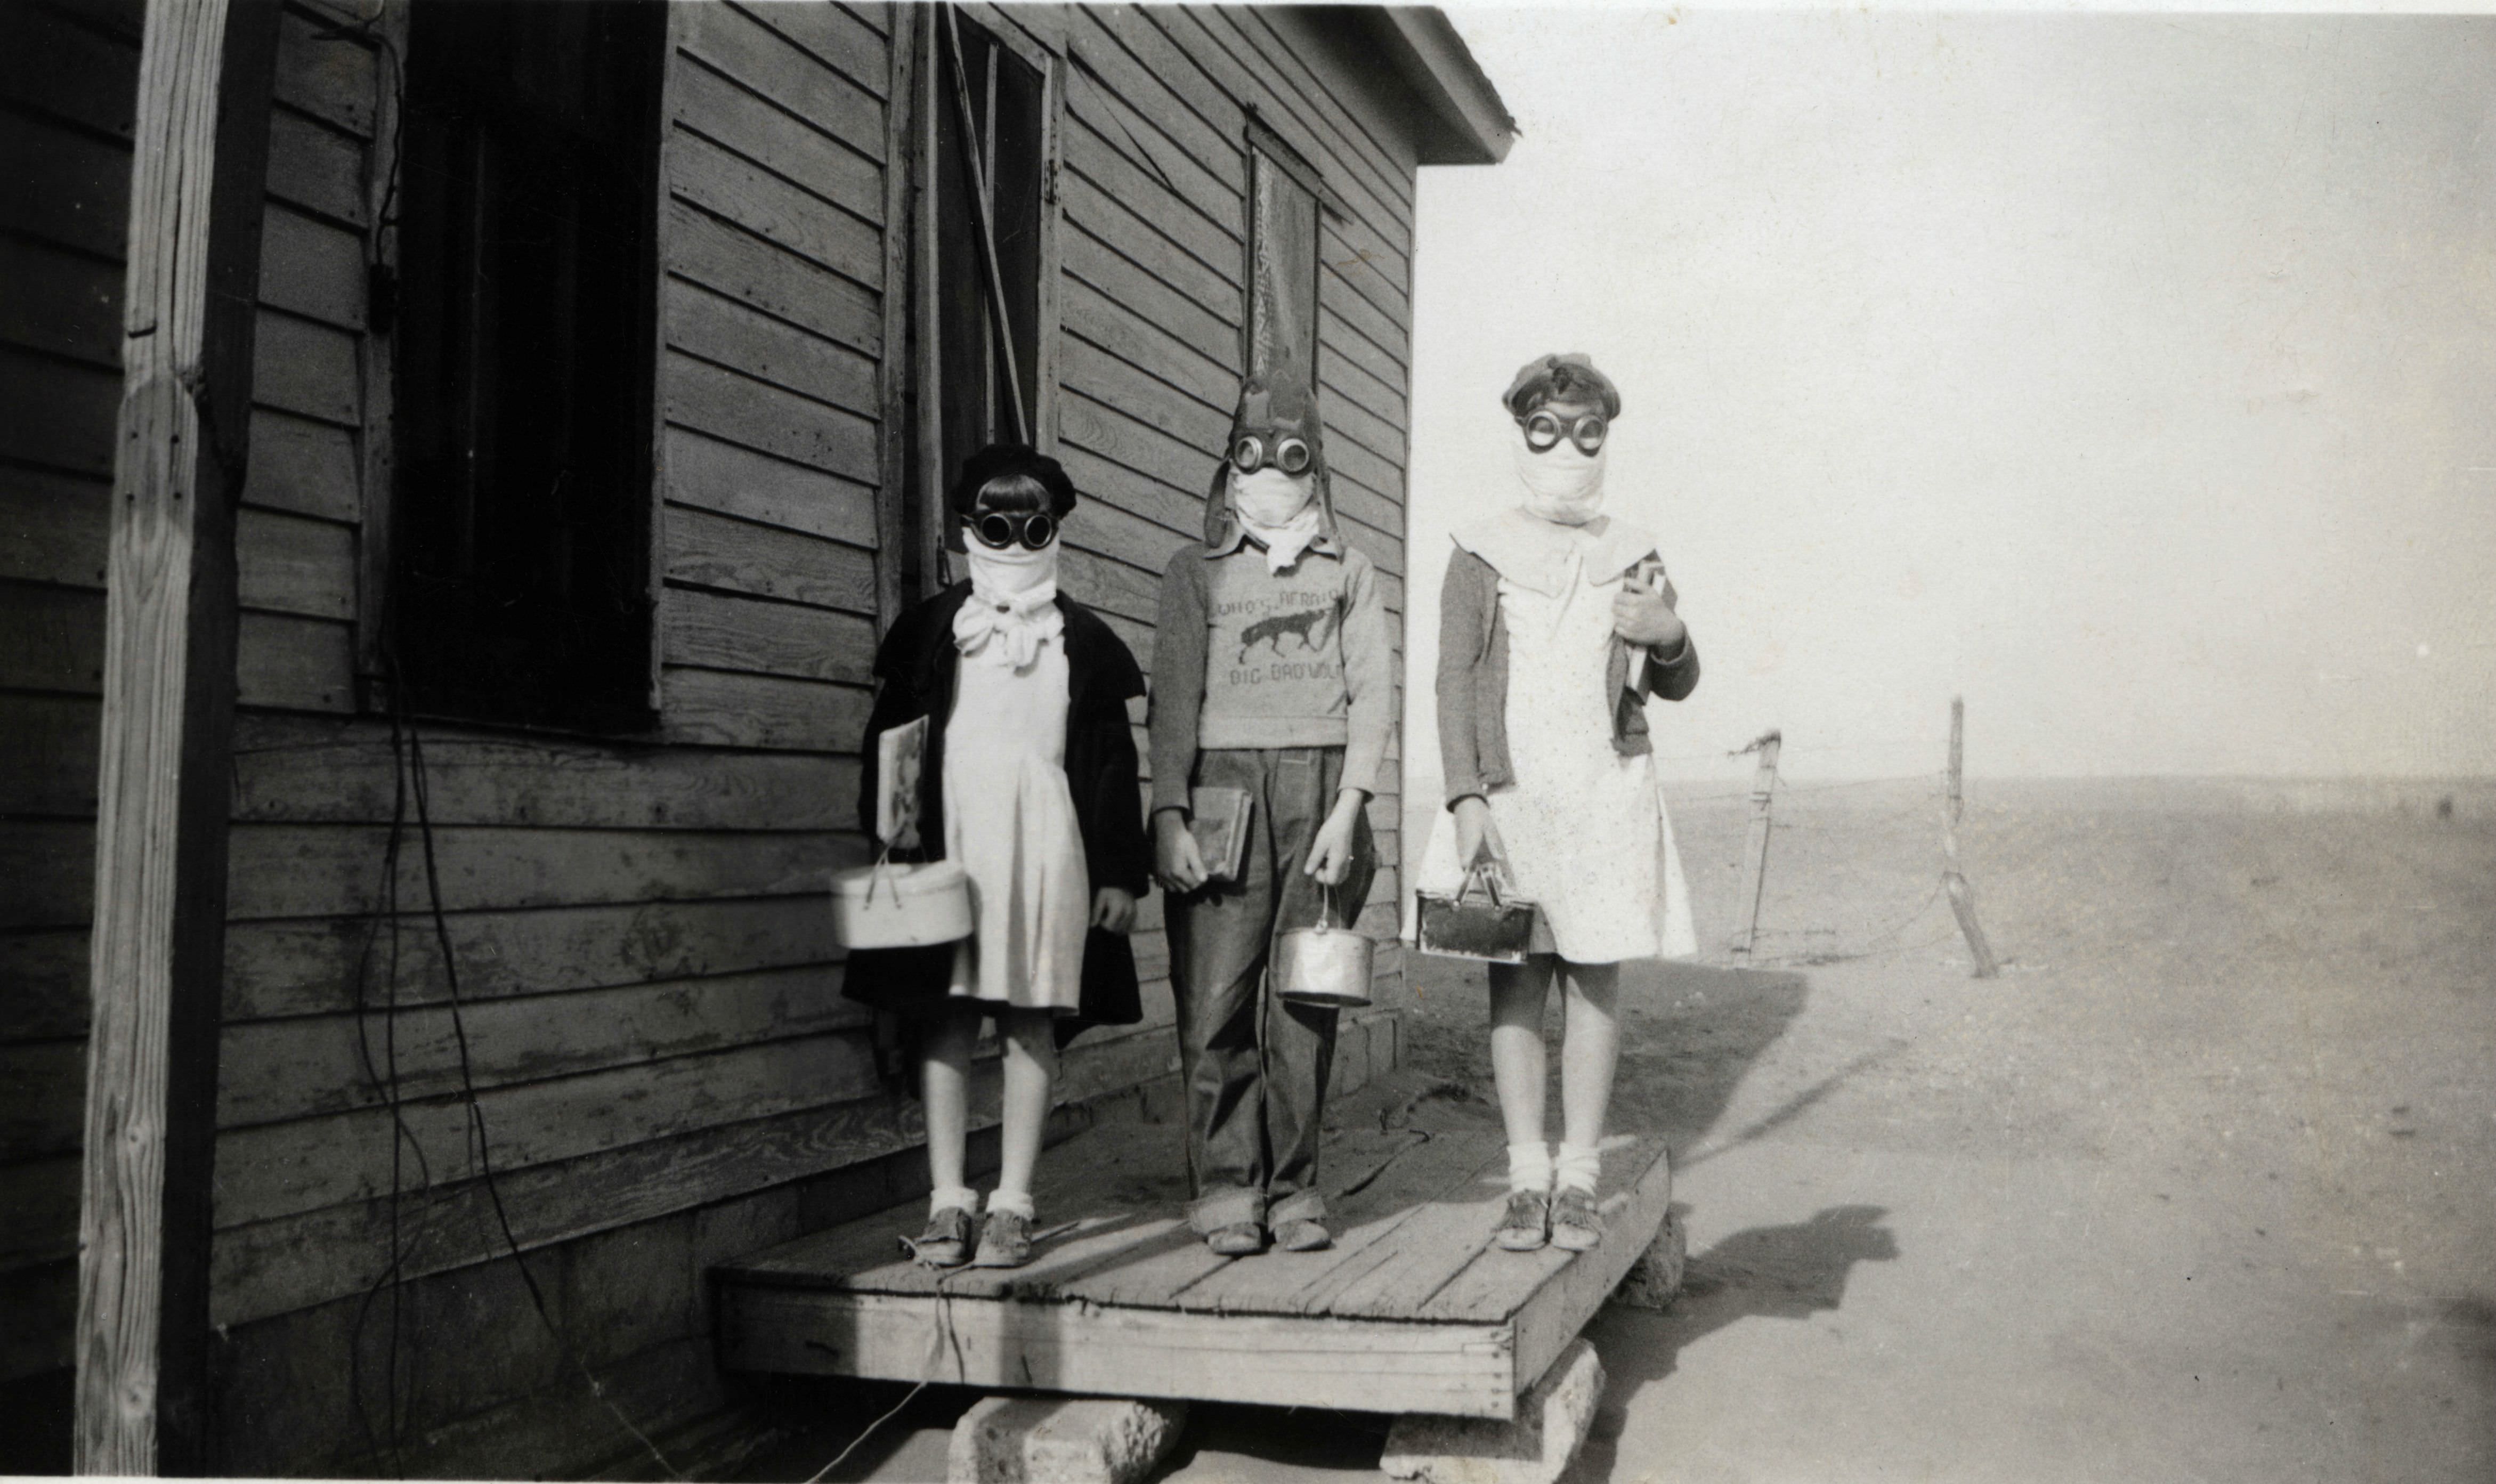 3 Children on their way to school in Oklahoma, US in 1933. This was during the terrible time know as The Dust Bowl, when storms ravaged the area in the 1930s. The storms were saw bad, people could not venture outside without wearing protection. This also heavily affected farming and gave people health issues as well, with some cases causing deaths. Severe drought and a failure to apply dryland farming methods know as the Aeolian process which would prevent wind erosion caused the phenomenon. The key areas affected were parts of Oklahoma, Texas, New Mexico, Colorado and half of Kansas. Poor families in particular had to abandon their homes and land entirely, as they couldn't grow anything and could not pay their mortgages. This was also during the Great Depression, leaving little other options for work in the affected areas. In the 1930s, it is estimated 3.5 million people moved out of the plain states, many to California.